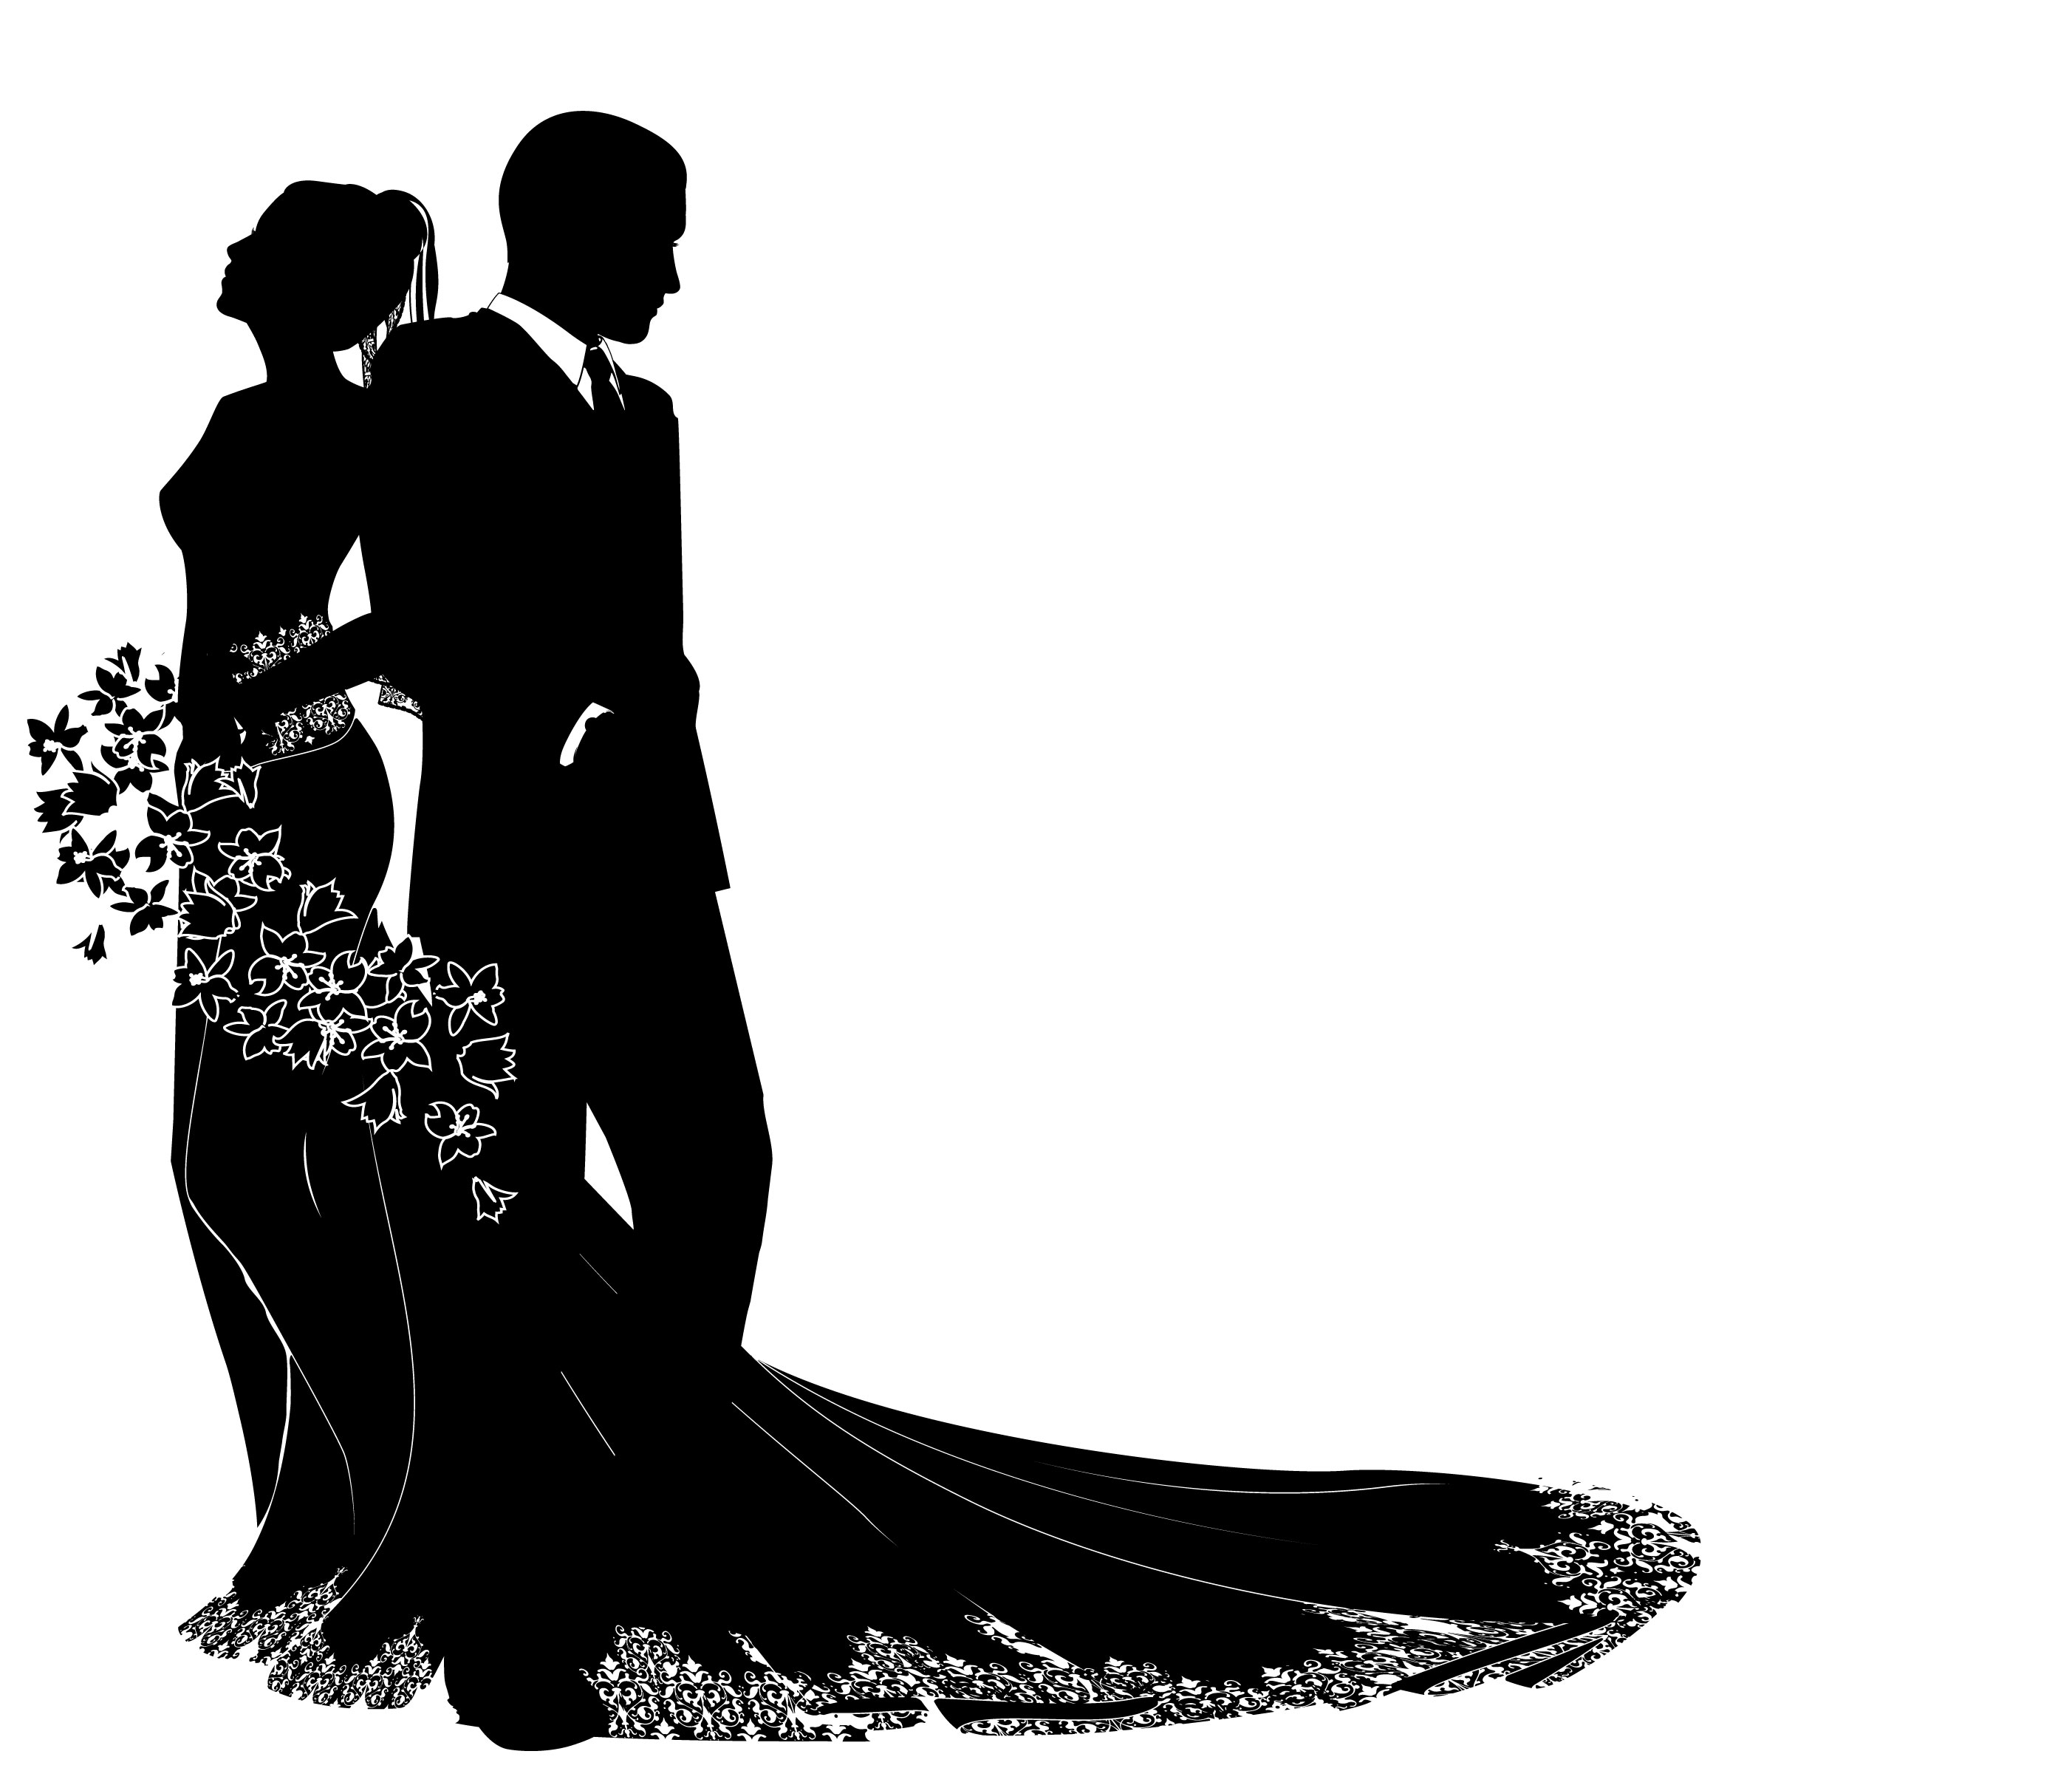 Been asked to design a Wedding Invitation - Graphic Design Forum 